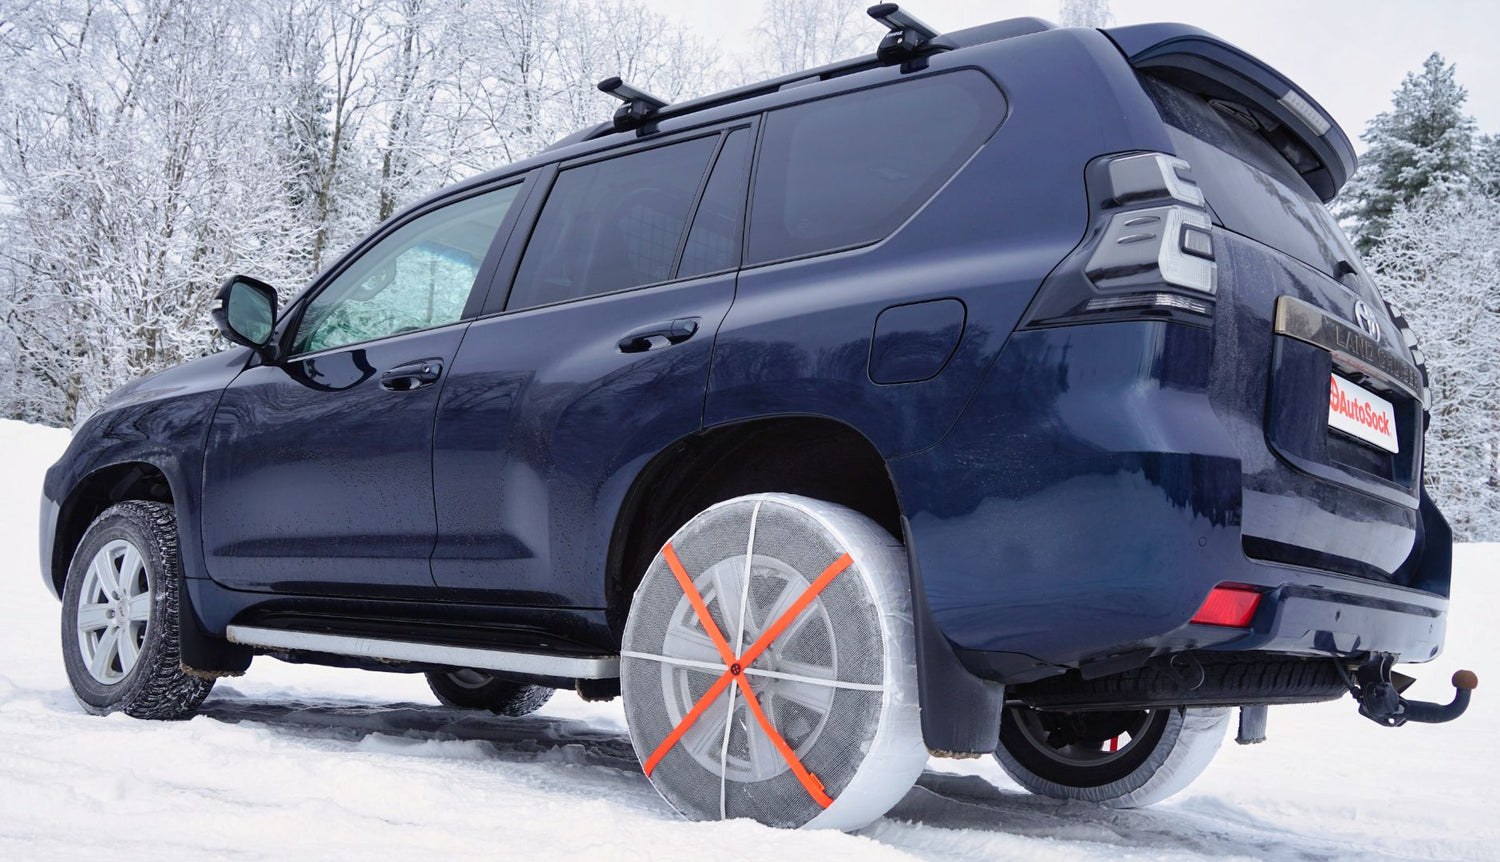 Toyota Land Cruiser off-road vehicle SUV with textile snow chains mounted on rear wheels, standing on snow